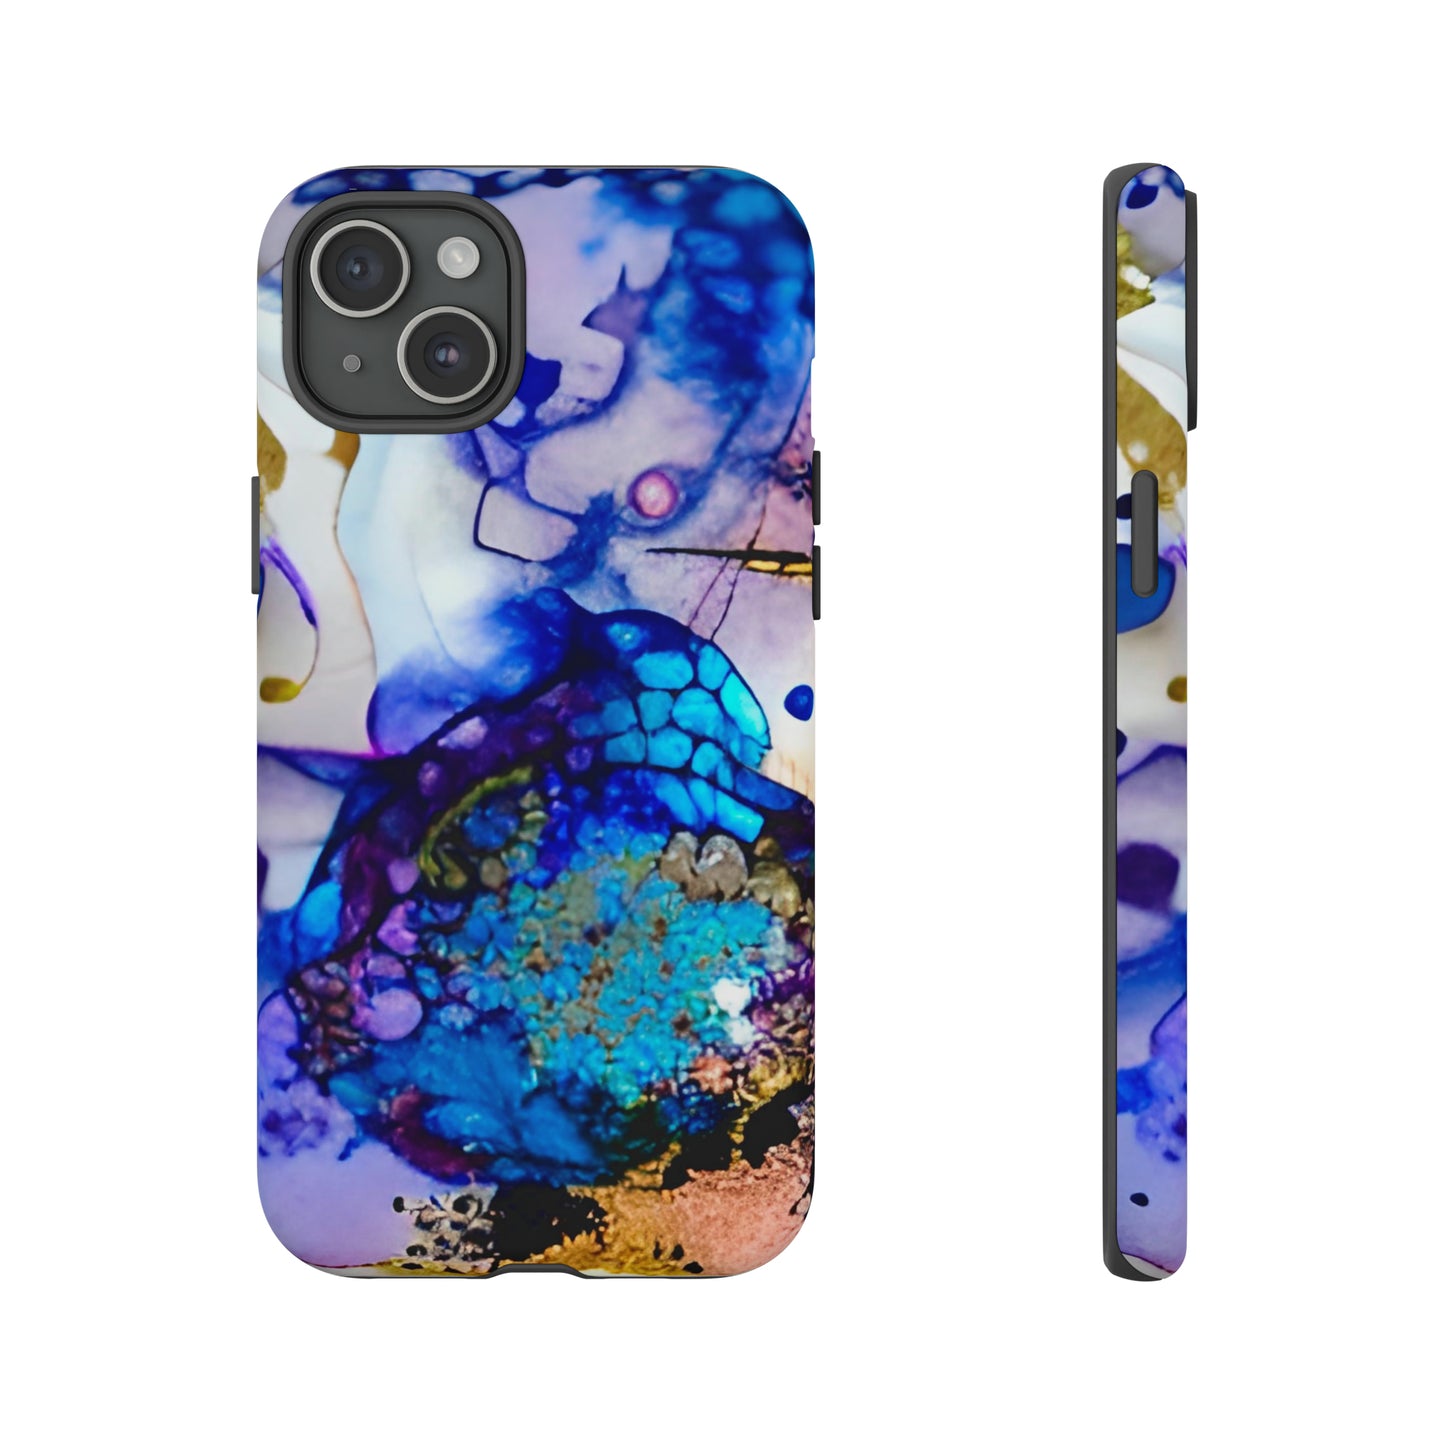 Blue Abstract Cell Phone Case, Cute Cellular Phone Case, Cell Phone Cover